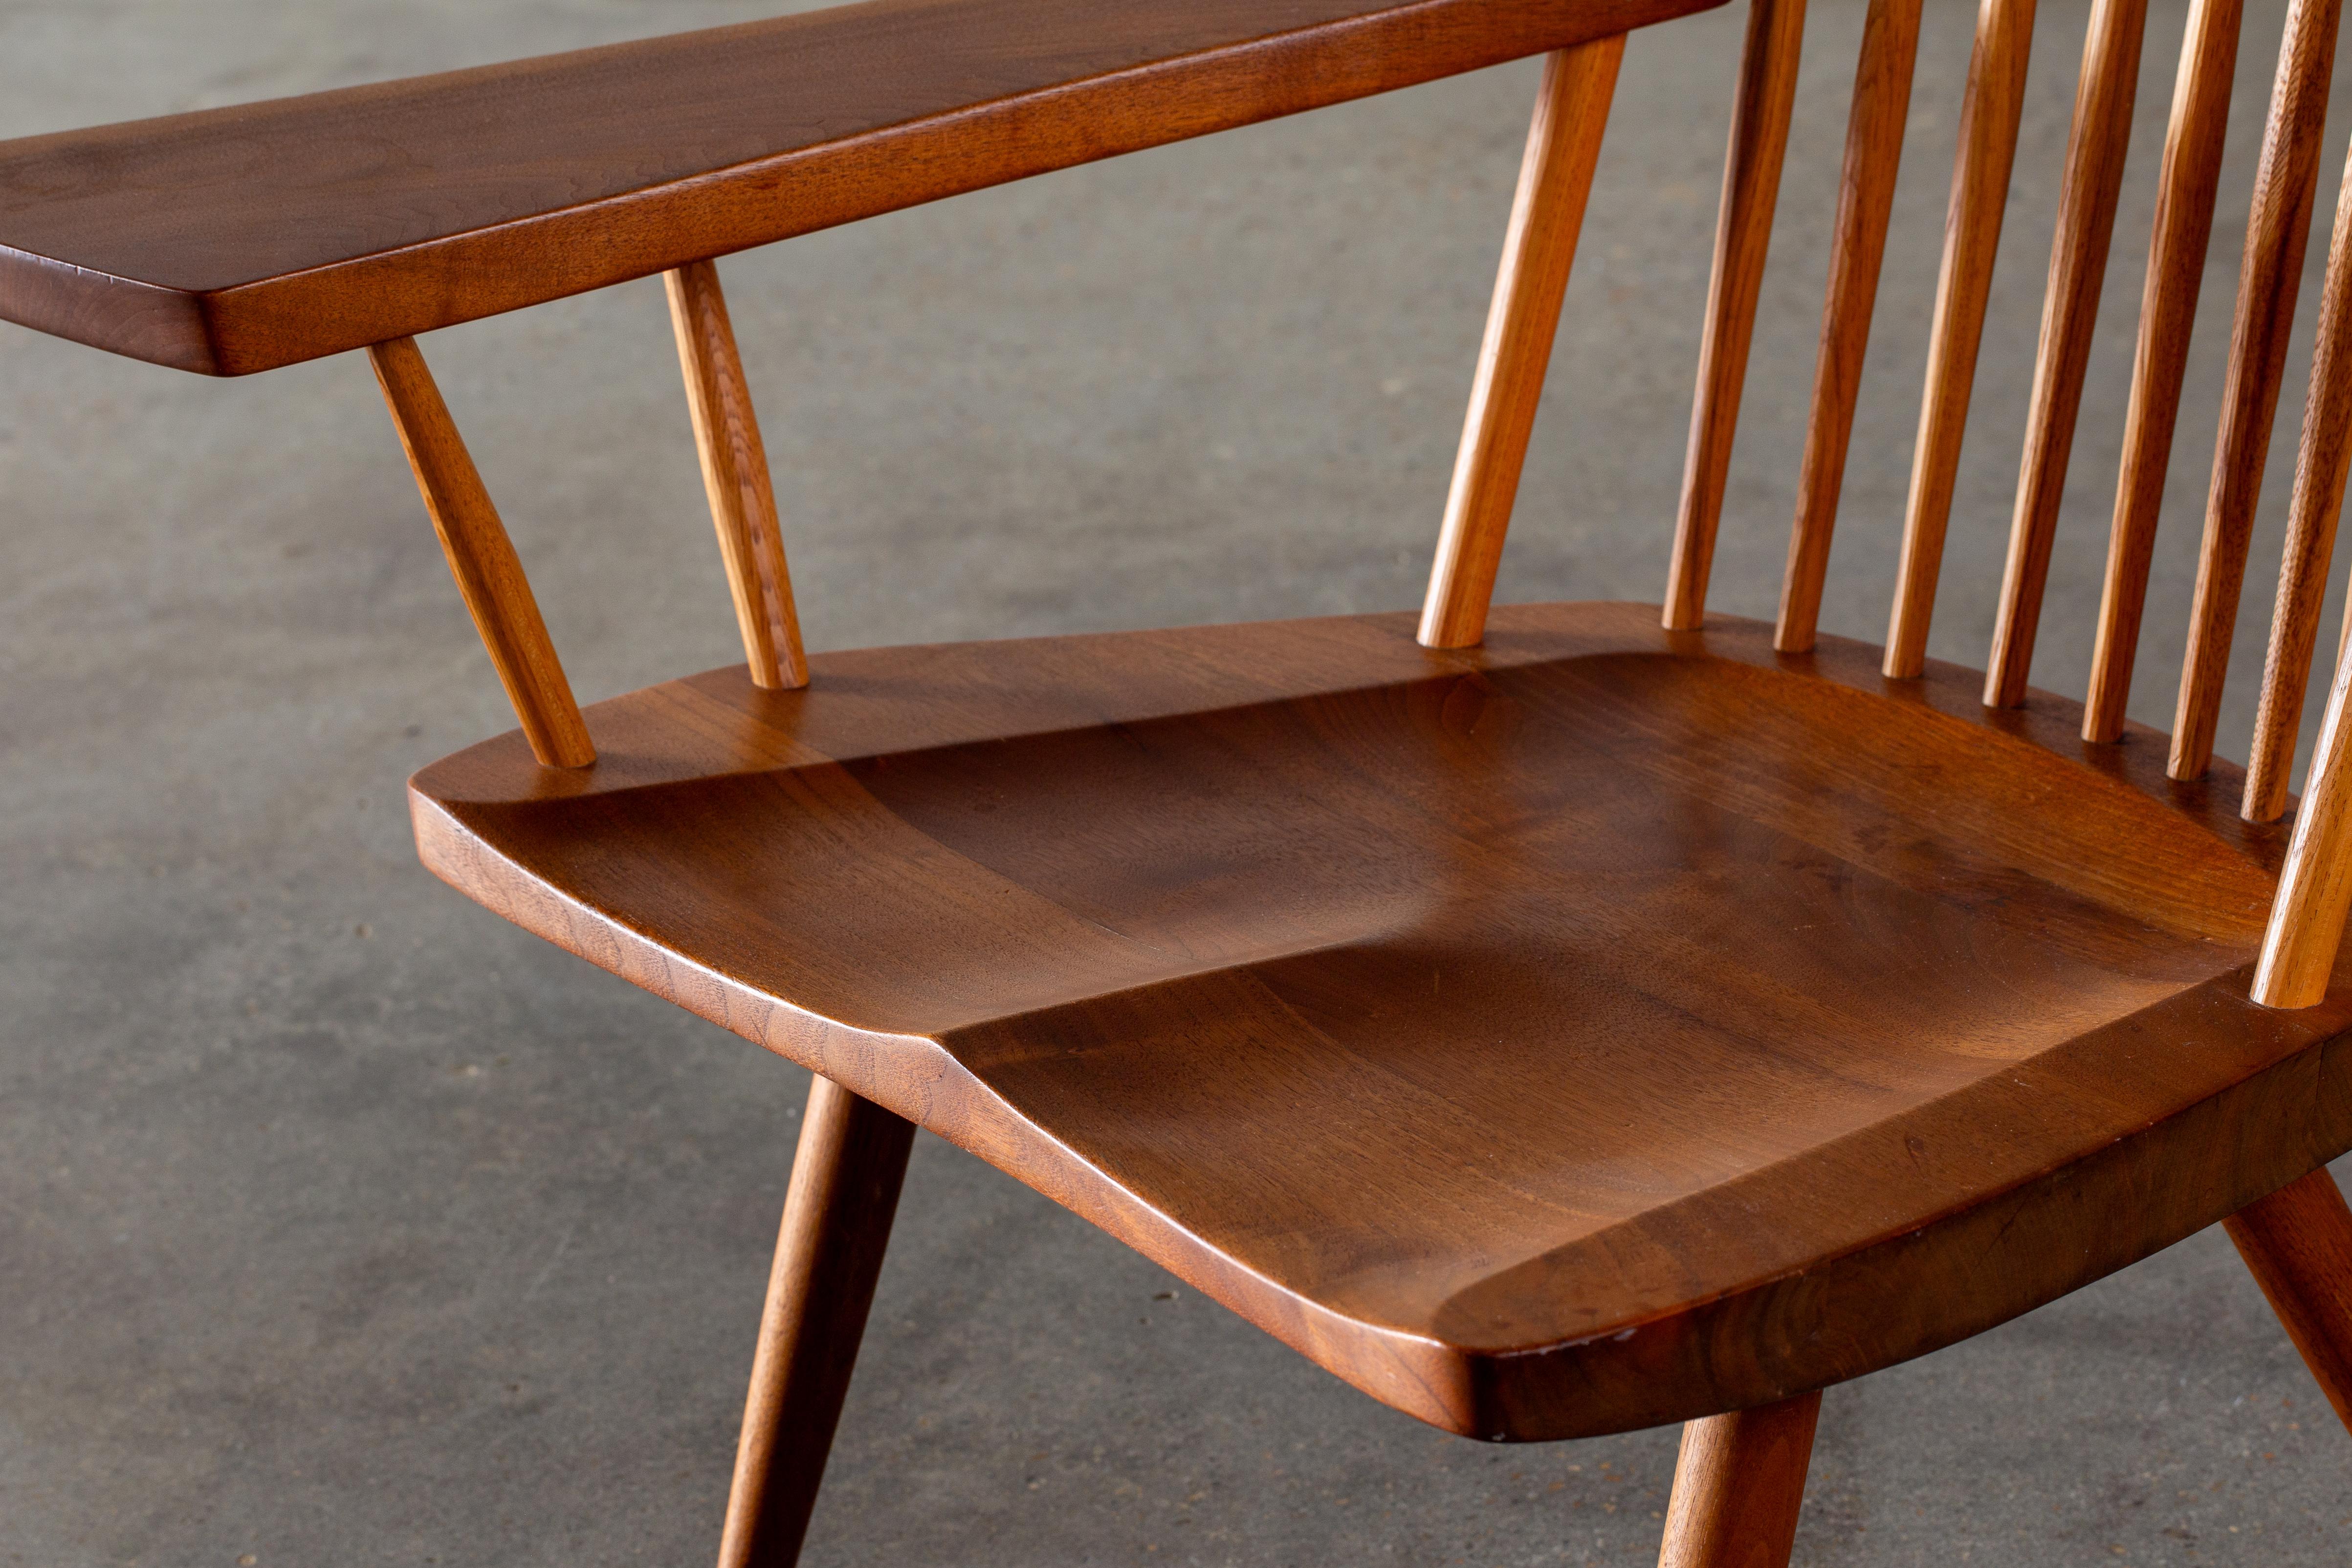 1975 George Nakashima Studio Lounge Chair with Free Form Arm Walnut and Hickory For Sale 3